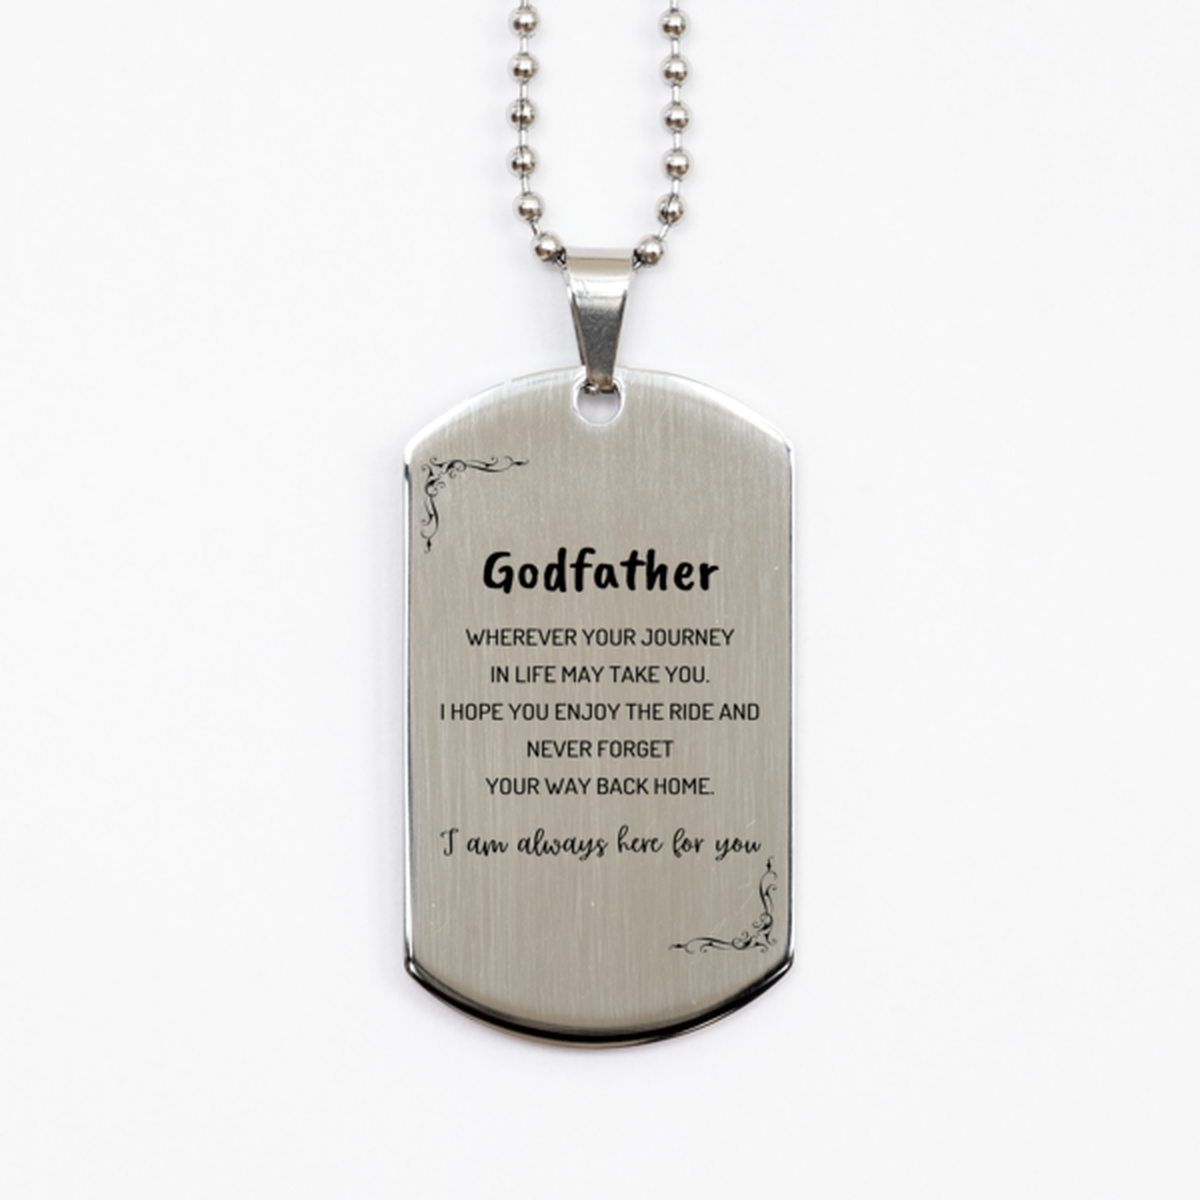 Godfather wherever your journey in life may take you, I am always here for you Godfather Silver Dog Tag, Awesome Christmas Gifts For Godfather, Godfather Birthday Gifts for Men Women Family Loved One